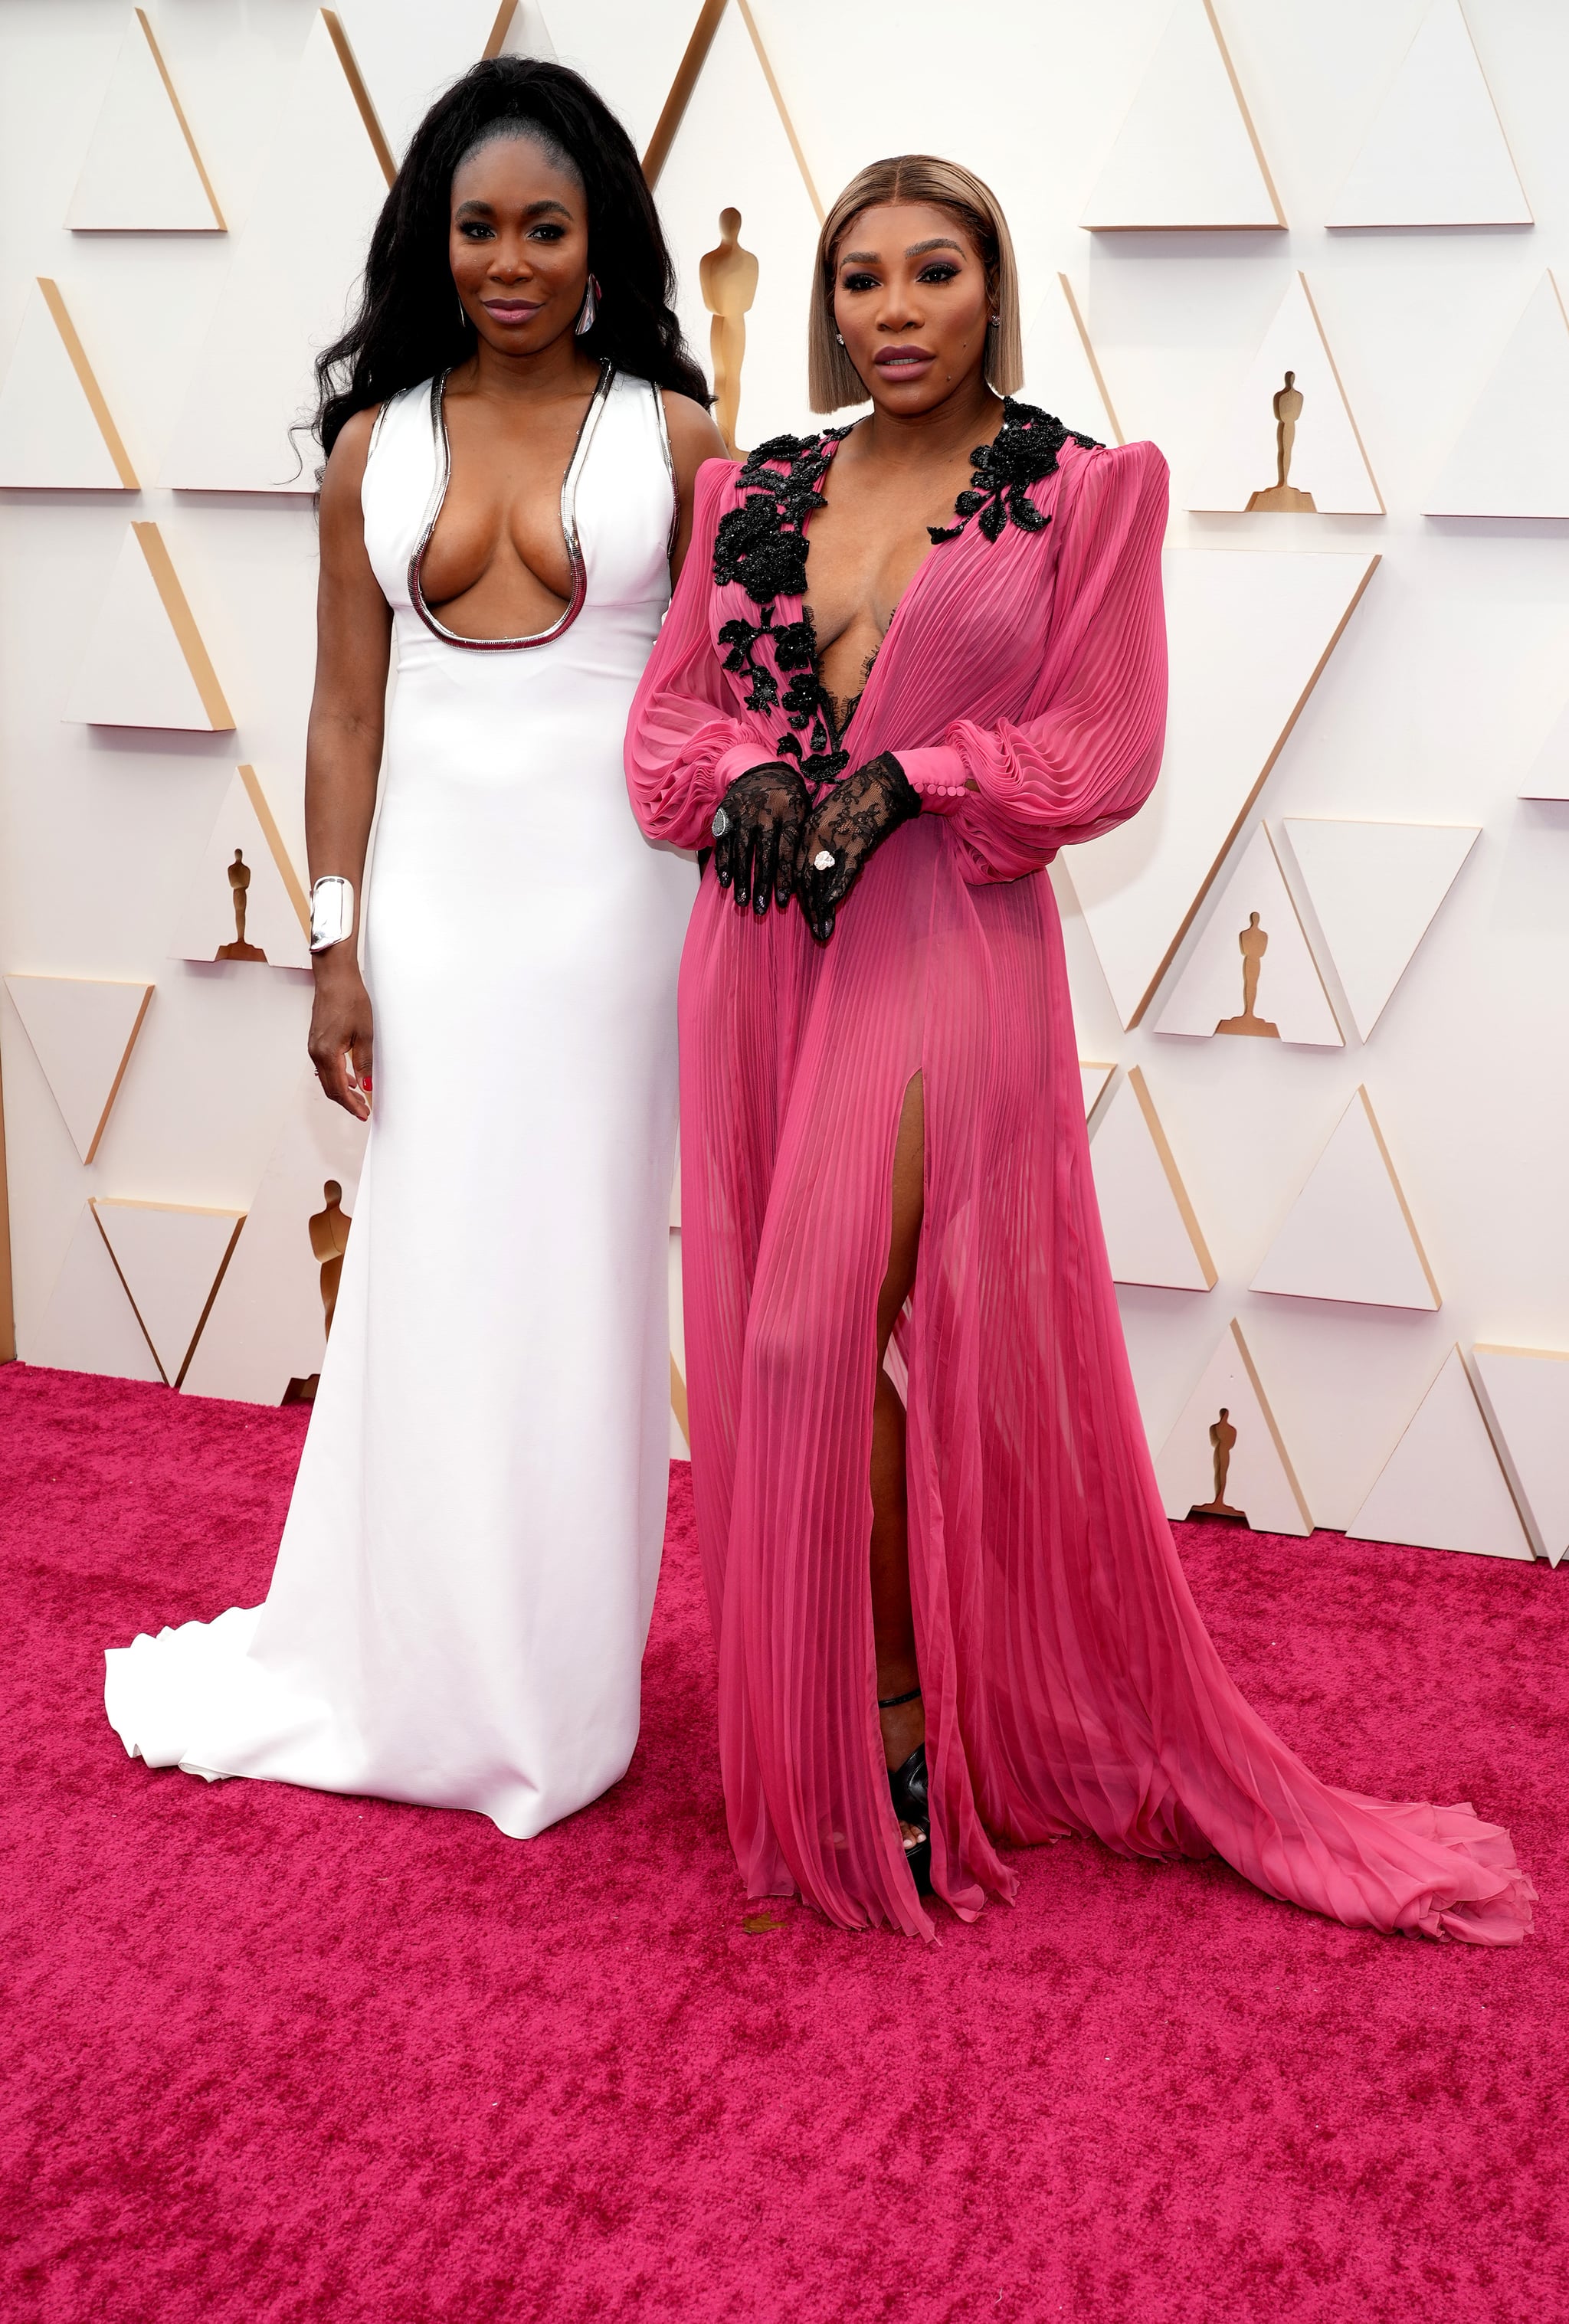 See Serena and Venus Williams's Gowns at the 2022 Oscars | POPSUGAR Fashion